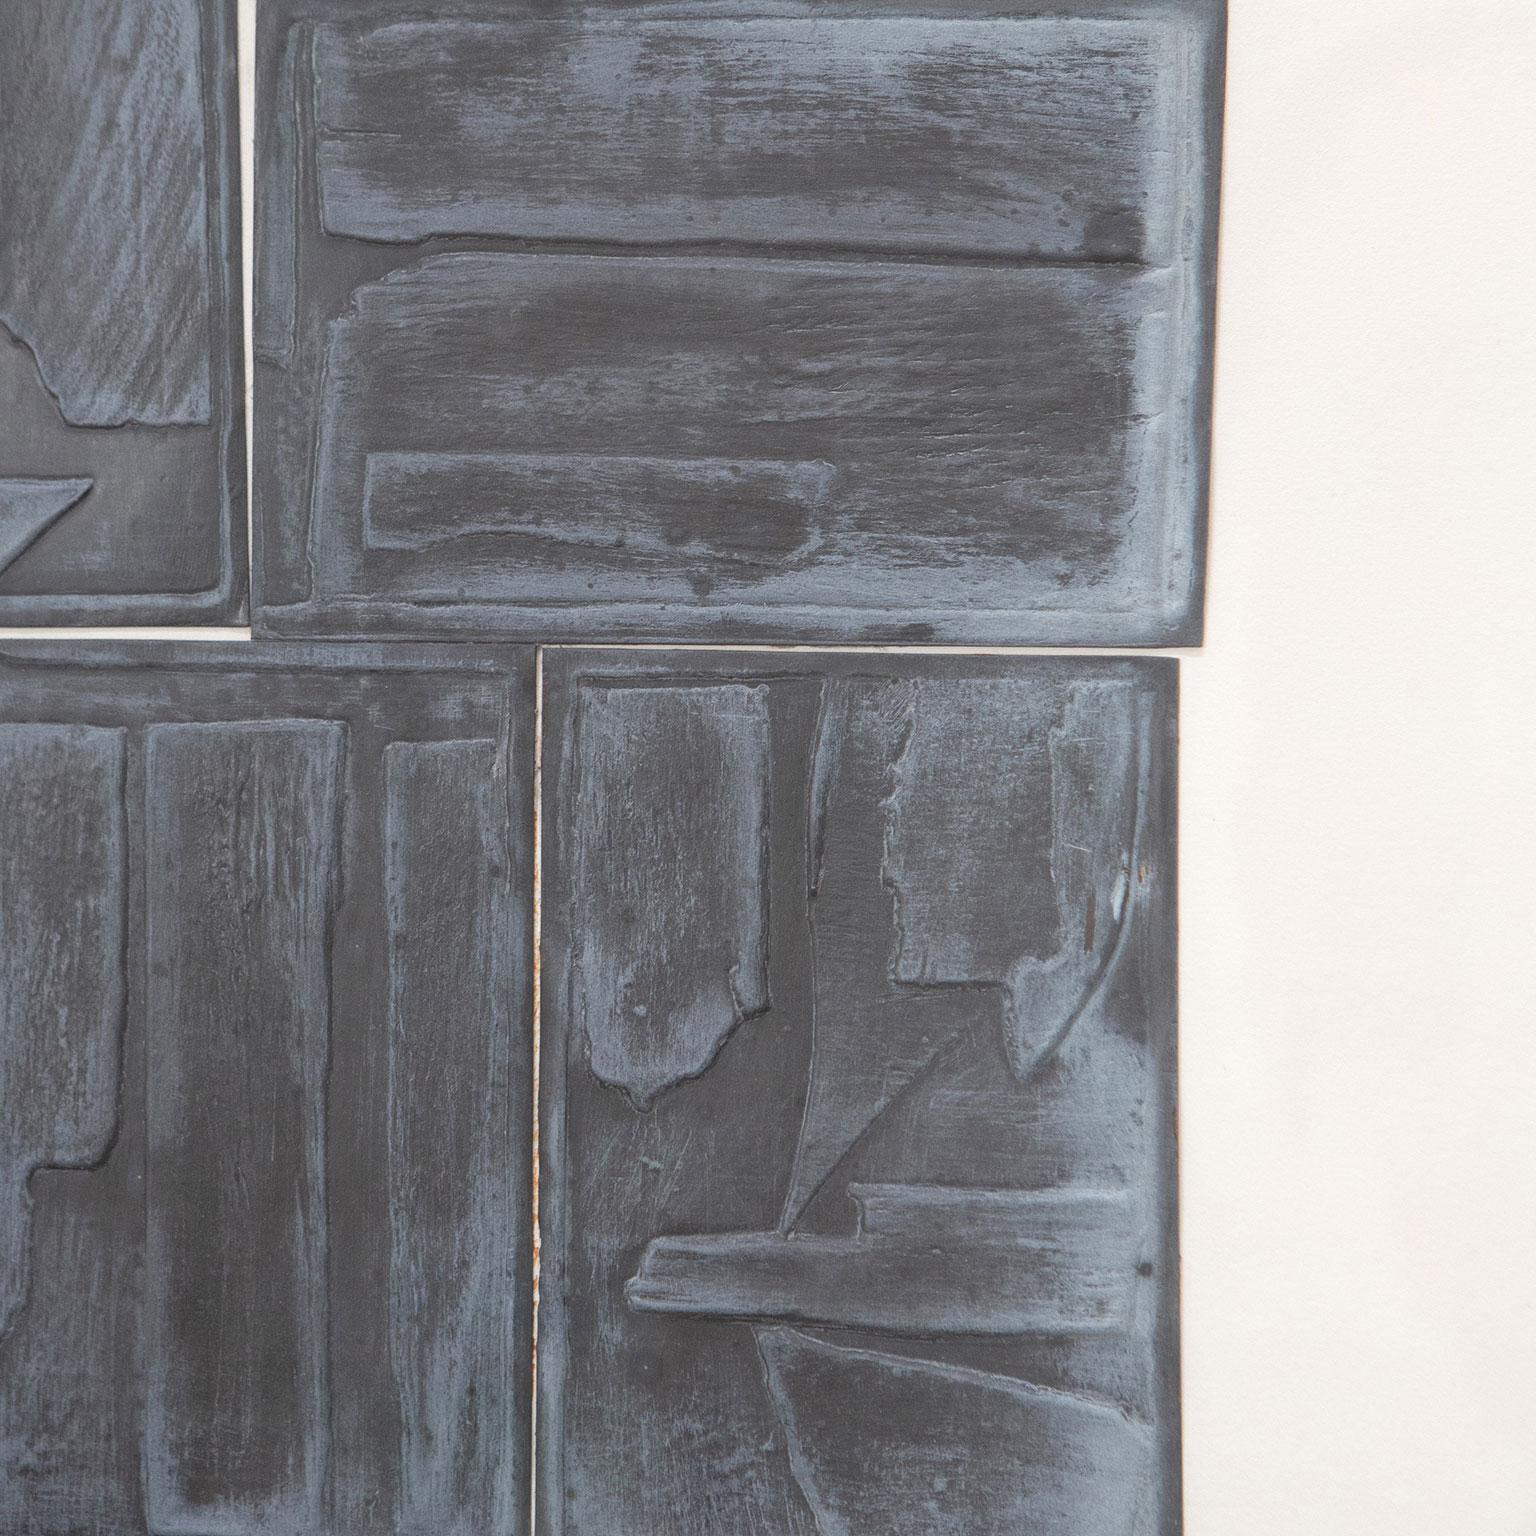 The Great Wall - Abstract Expressionist Print by Louise Nevelson